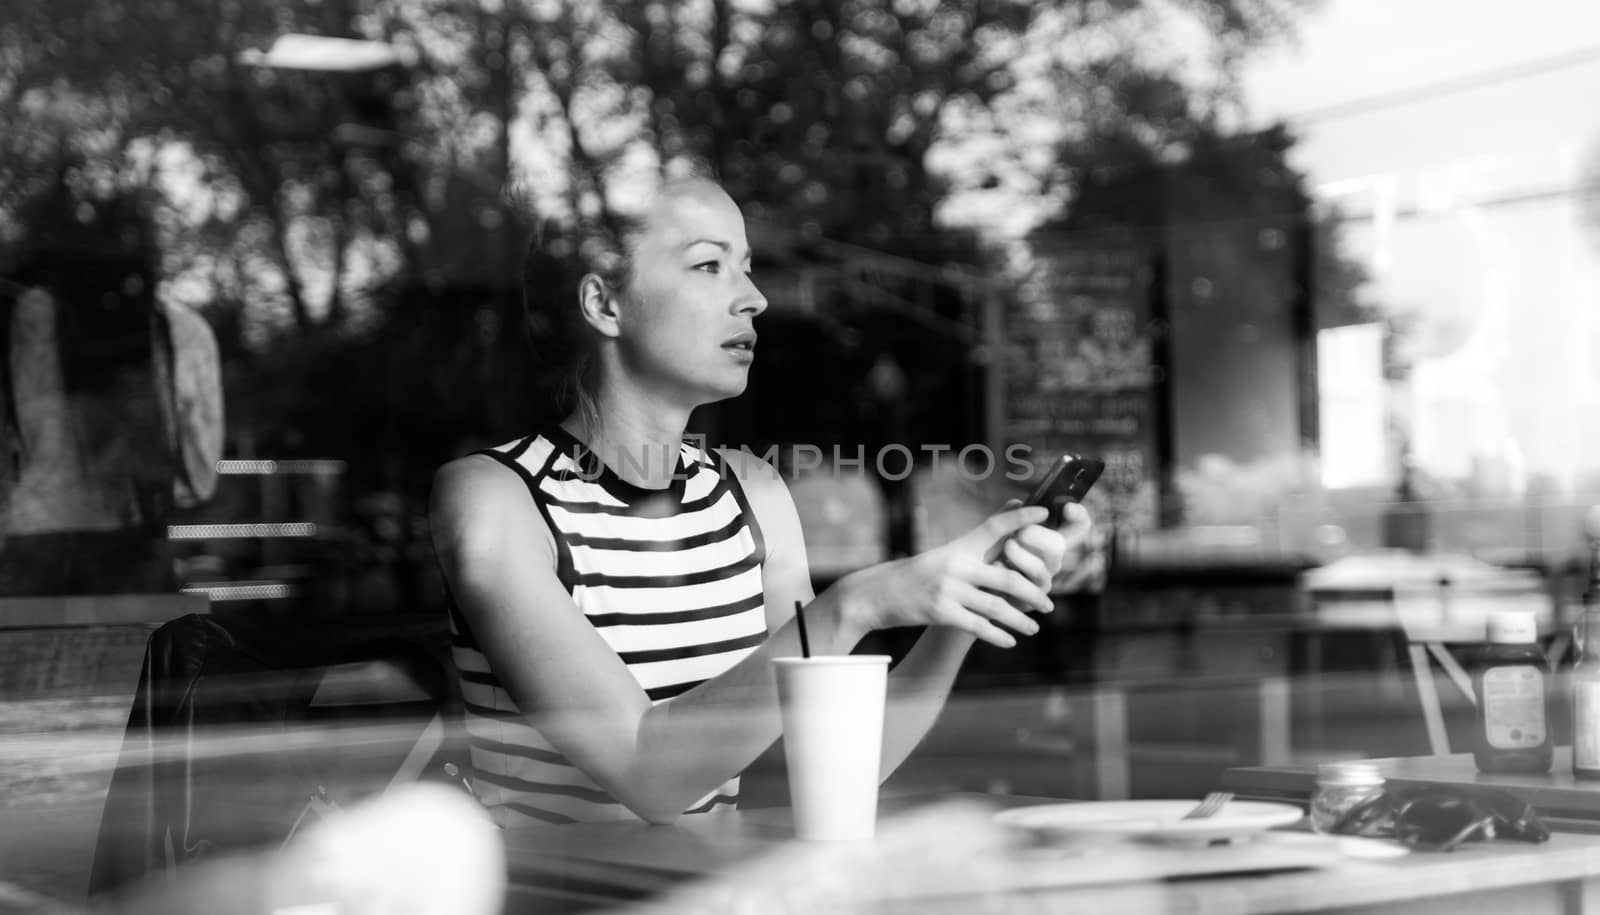 Thoughtful caucasian woman holding mobile phone while looking through the coffee shop window during coffee break. Street reflections in the window glass. Black and white image.